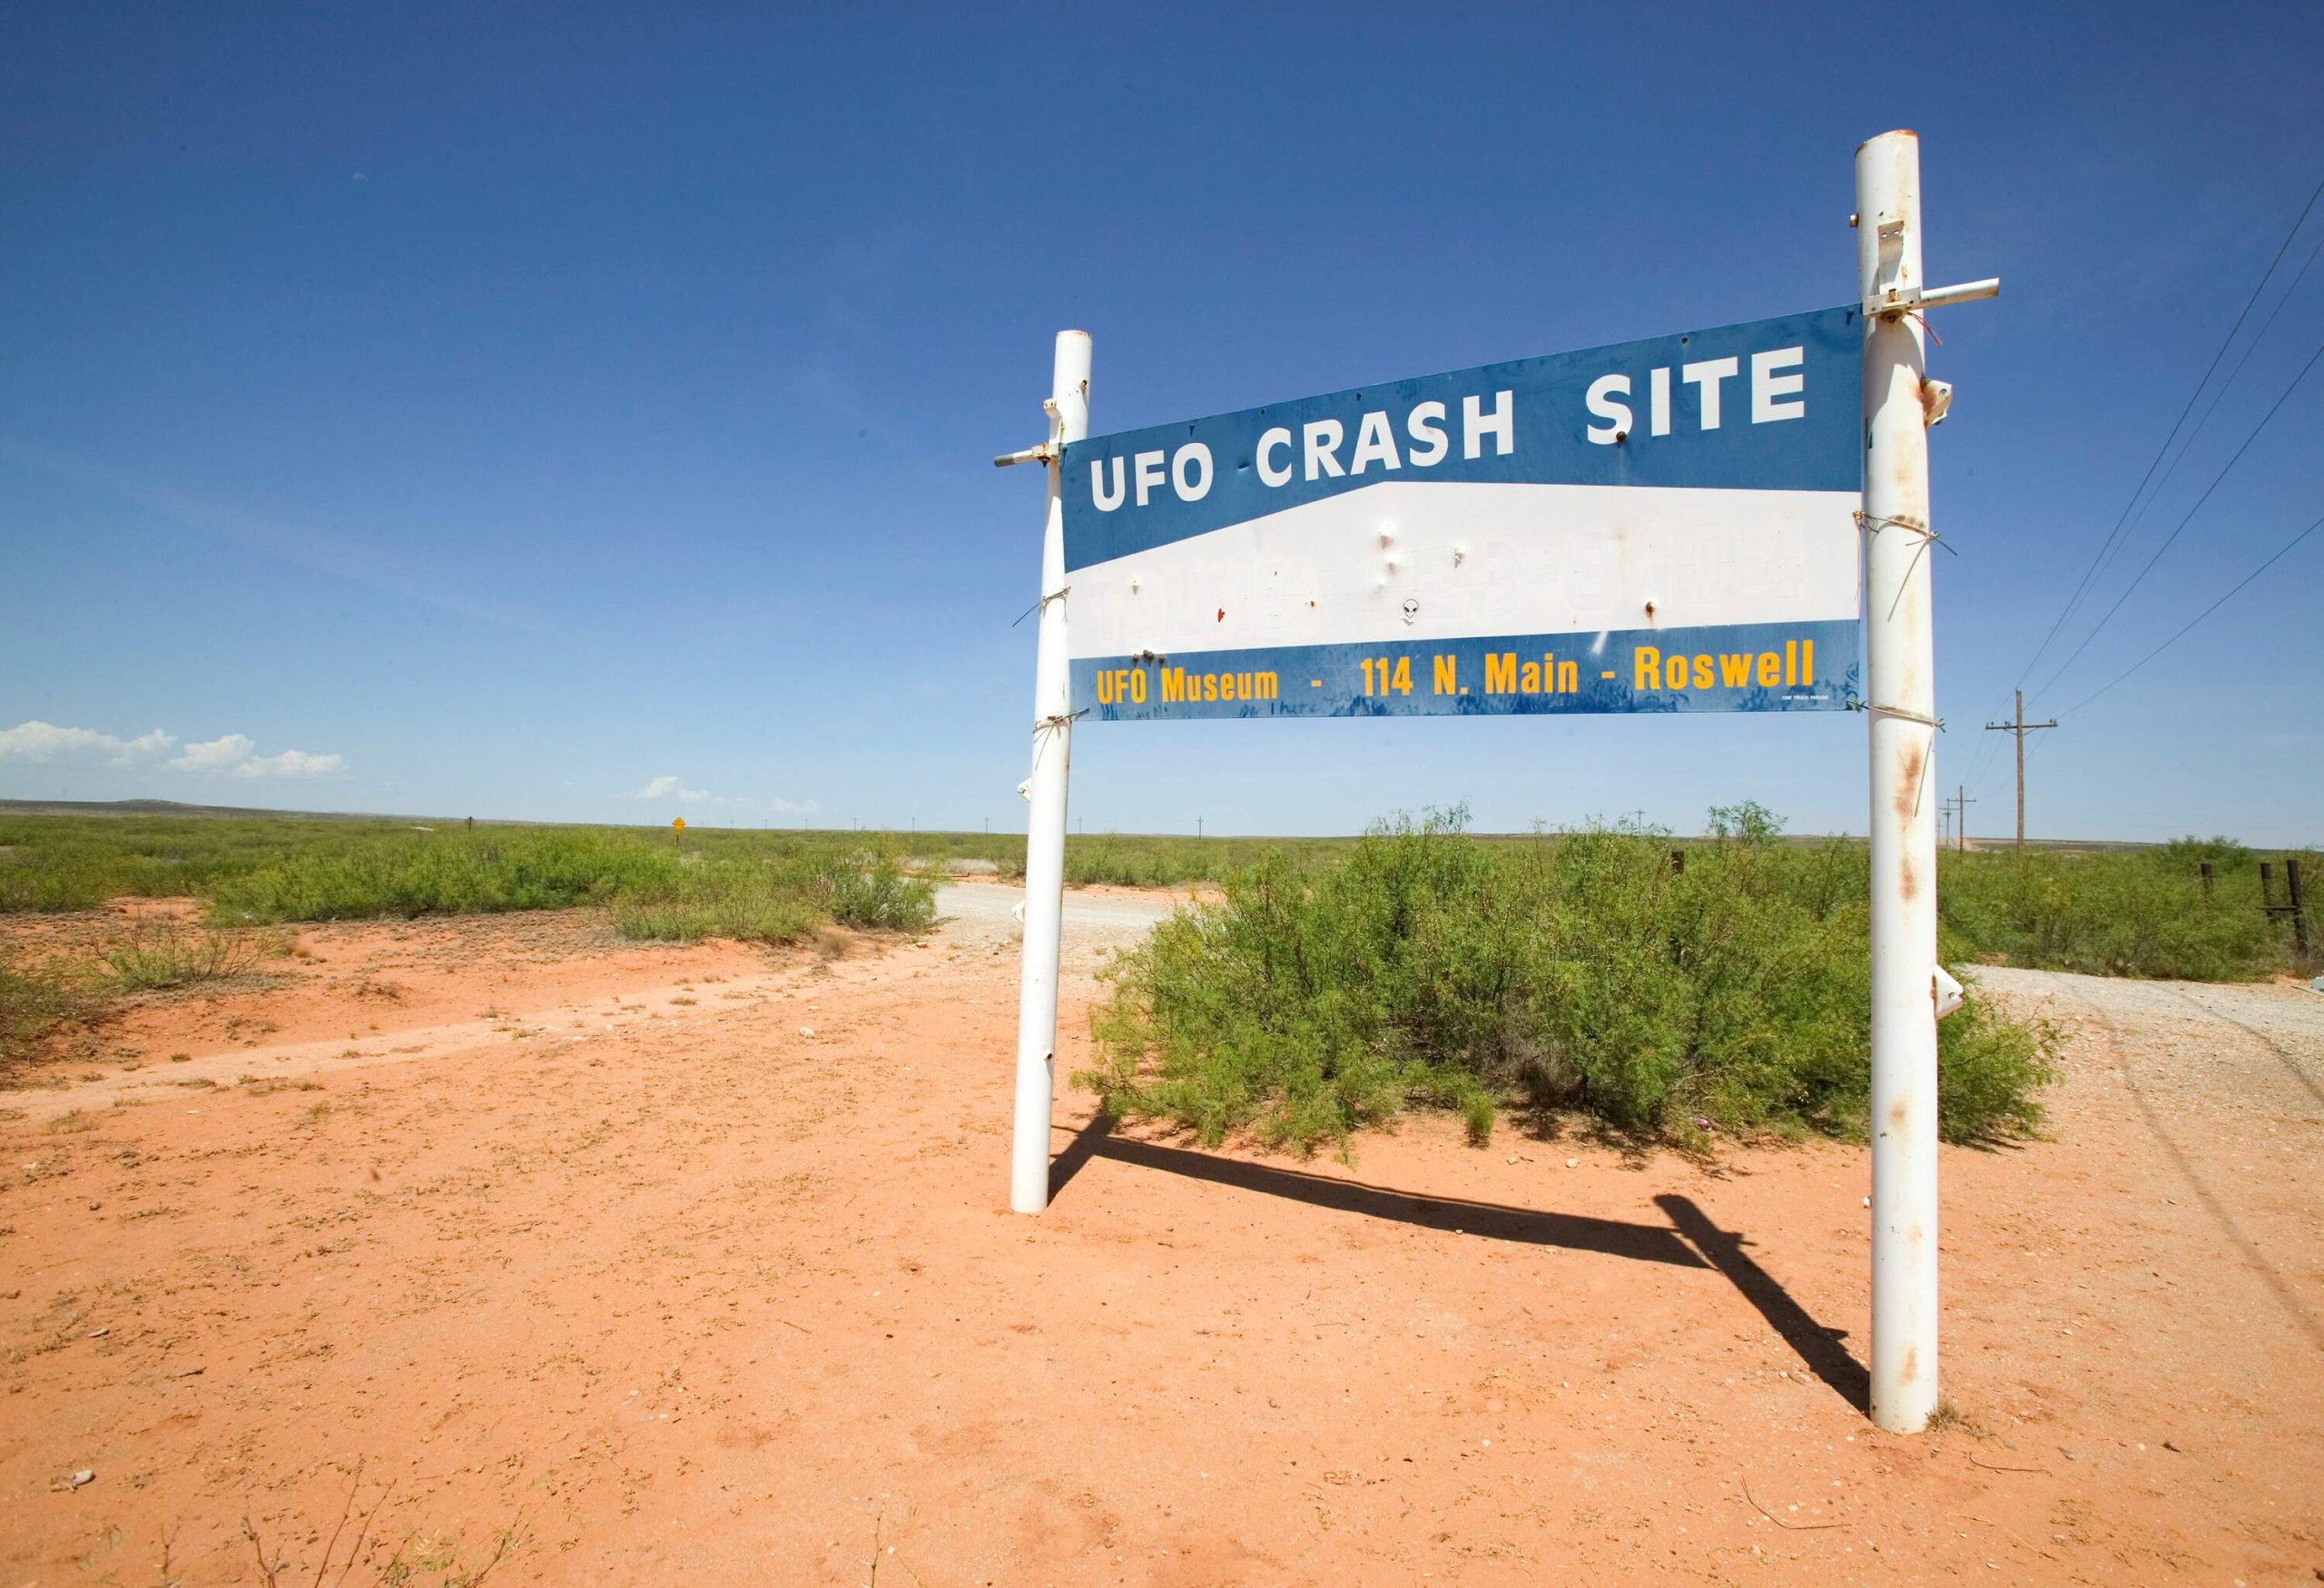 DEST_USA_NEW-MEXICO_ROSWELL_UFO-MUSEUM_GettyImages-6117-000980